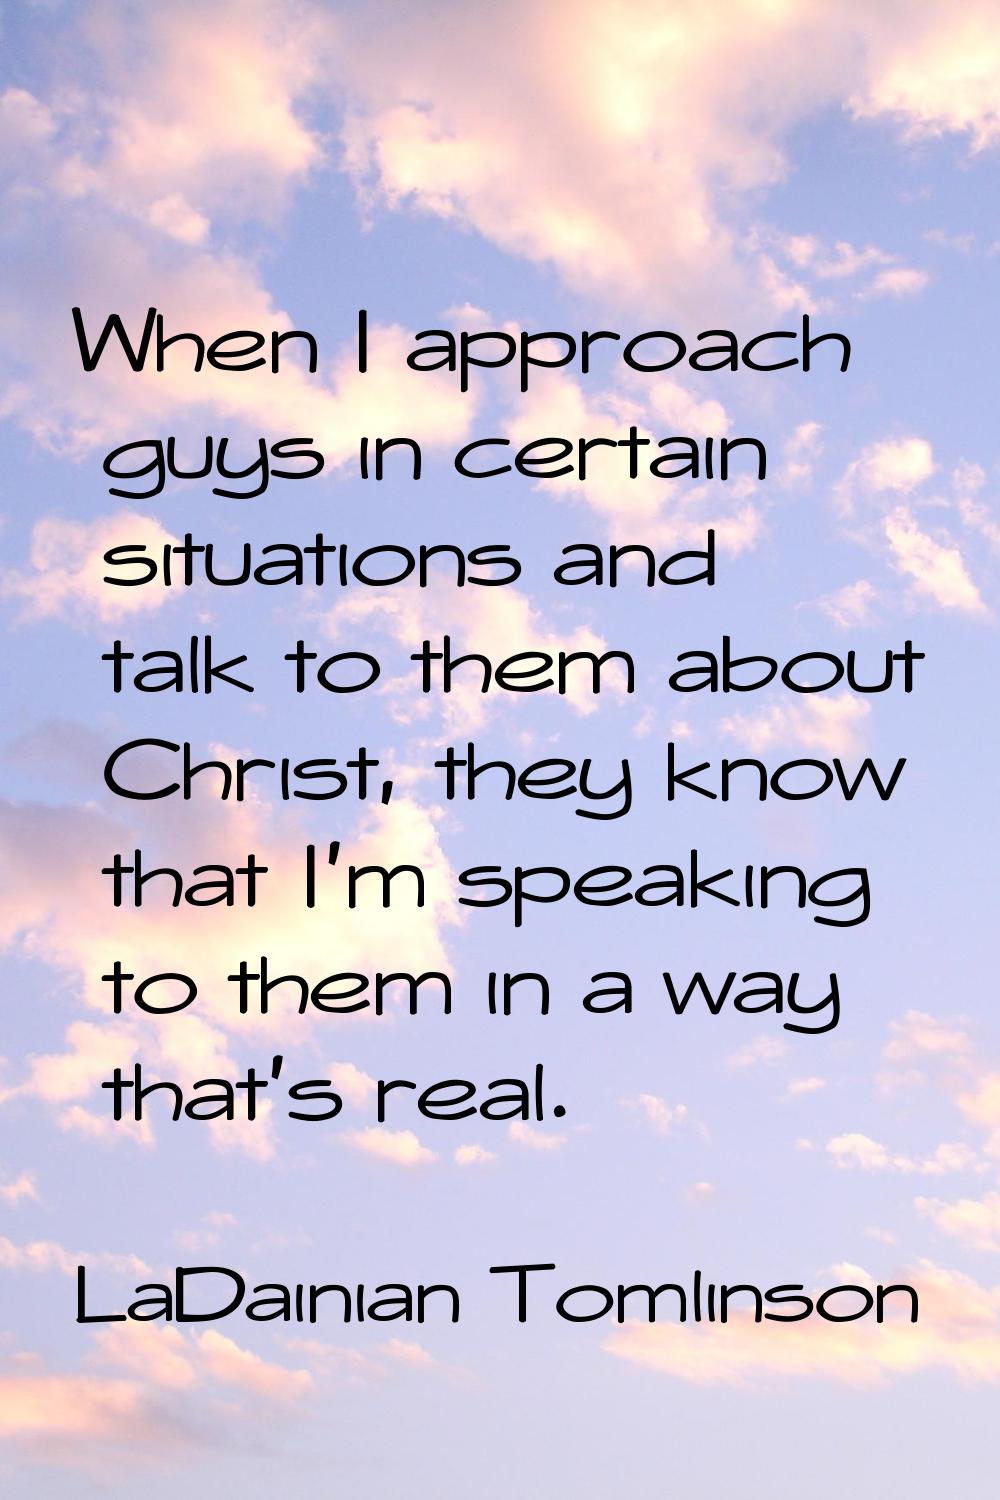 When I approach guys in certain situations and talk to them about Christ, they know that I'm speaki